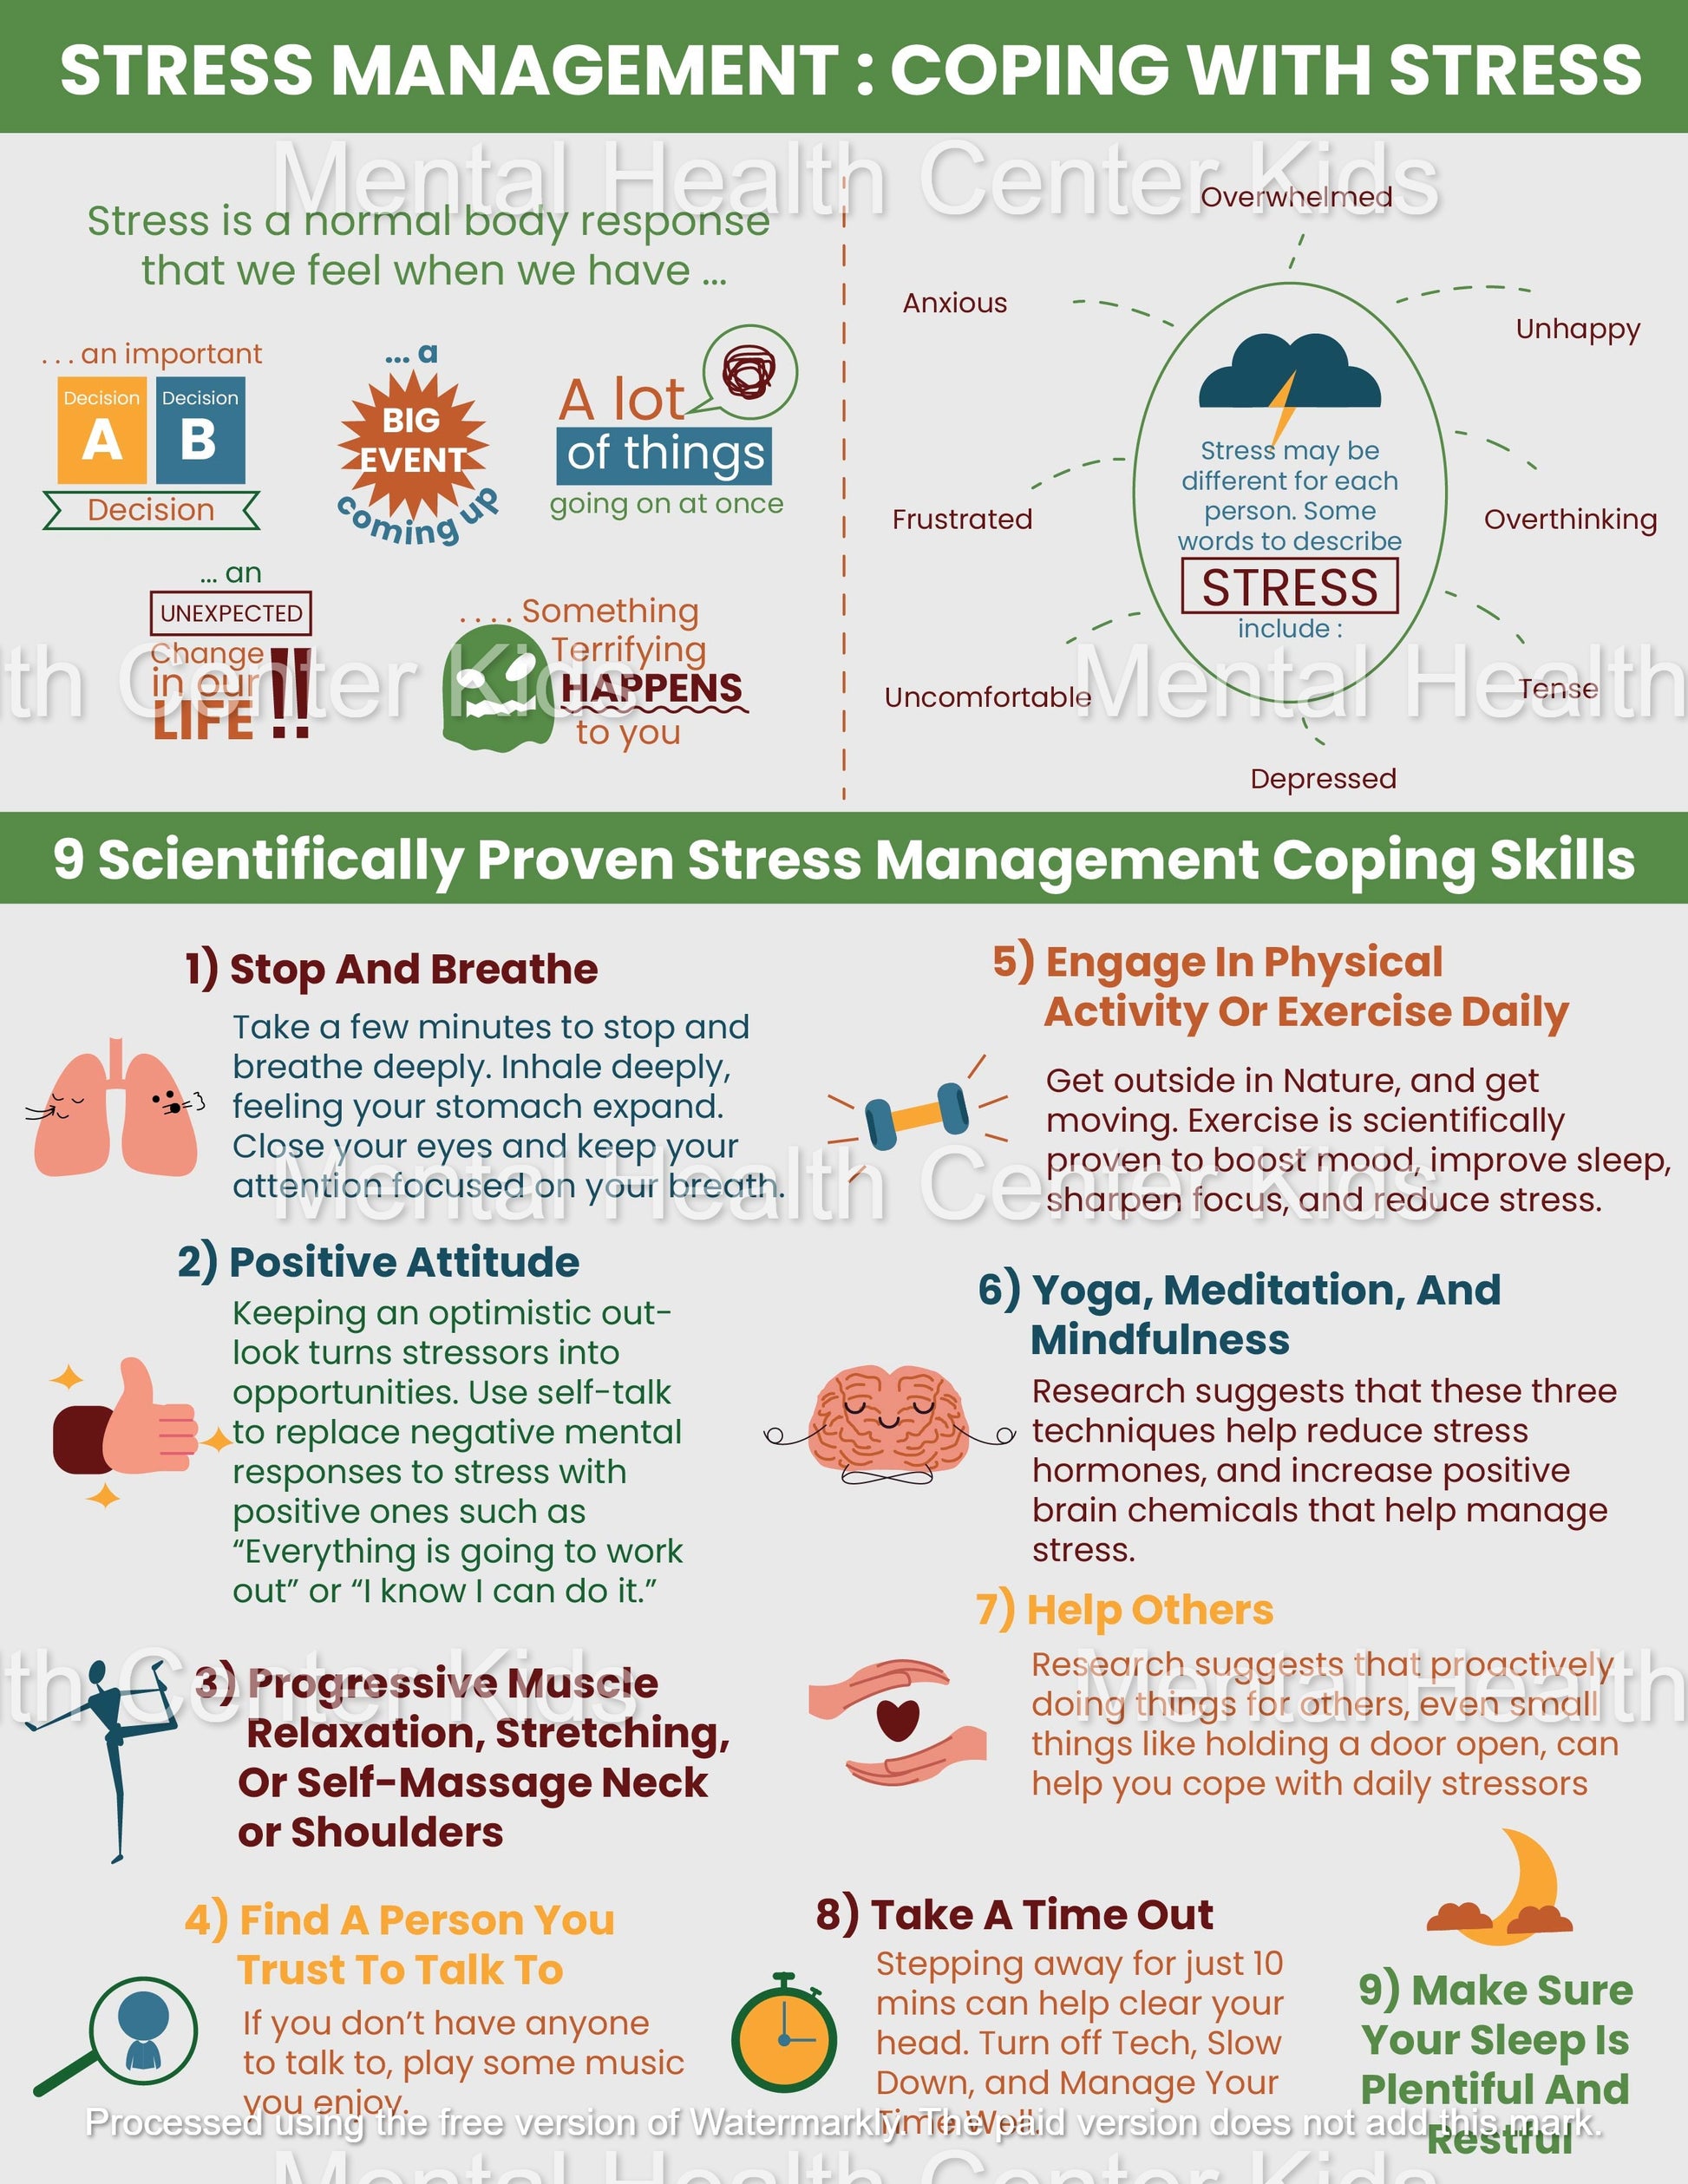 Mental Health Matters: Strategies for Stress Management - Cognitive Strategies to Combat Stress